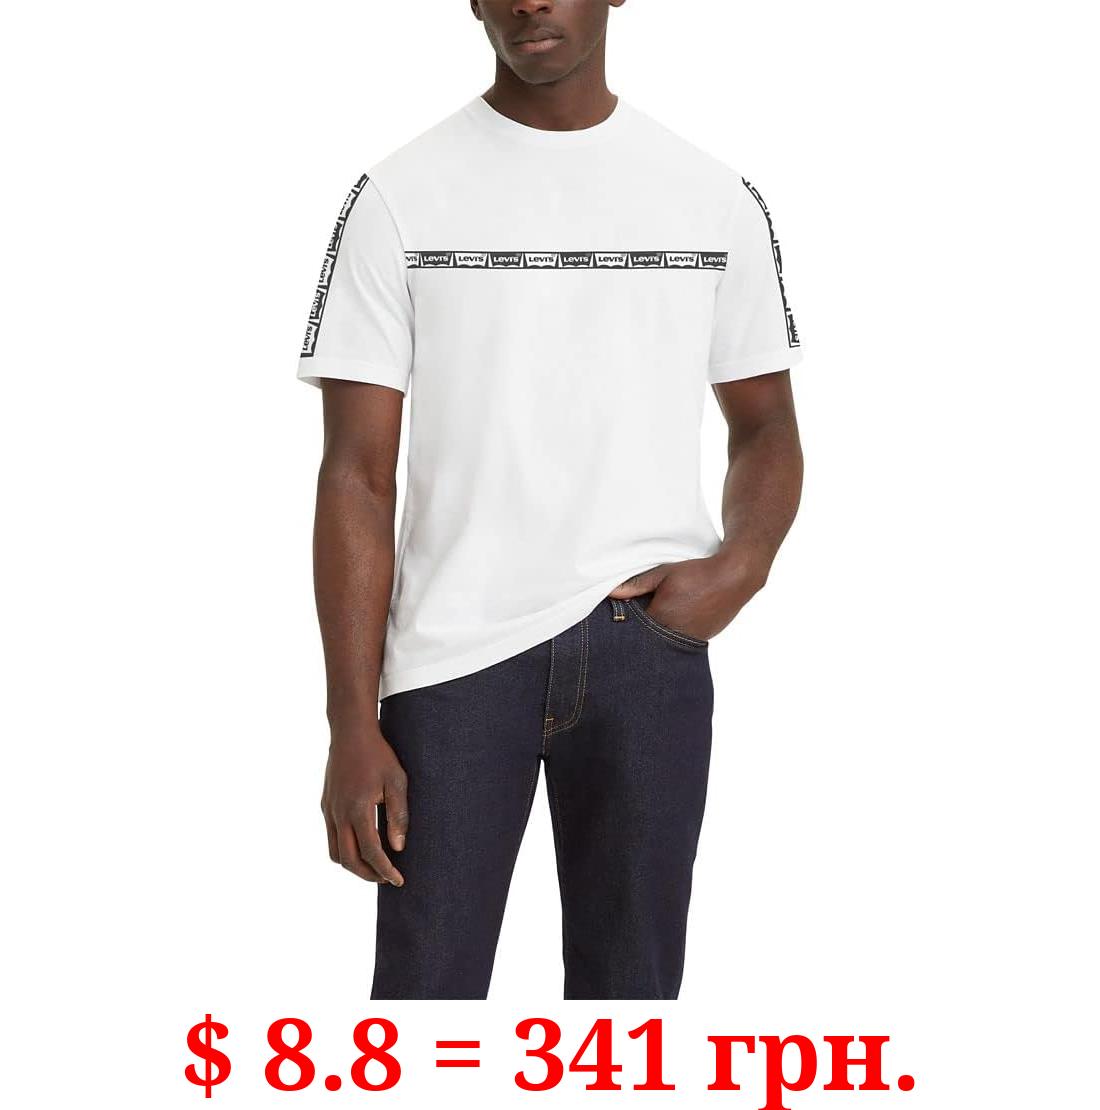 Levi's Men's Graphic Tees (Also Available in Big & Tall)